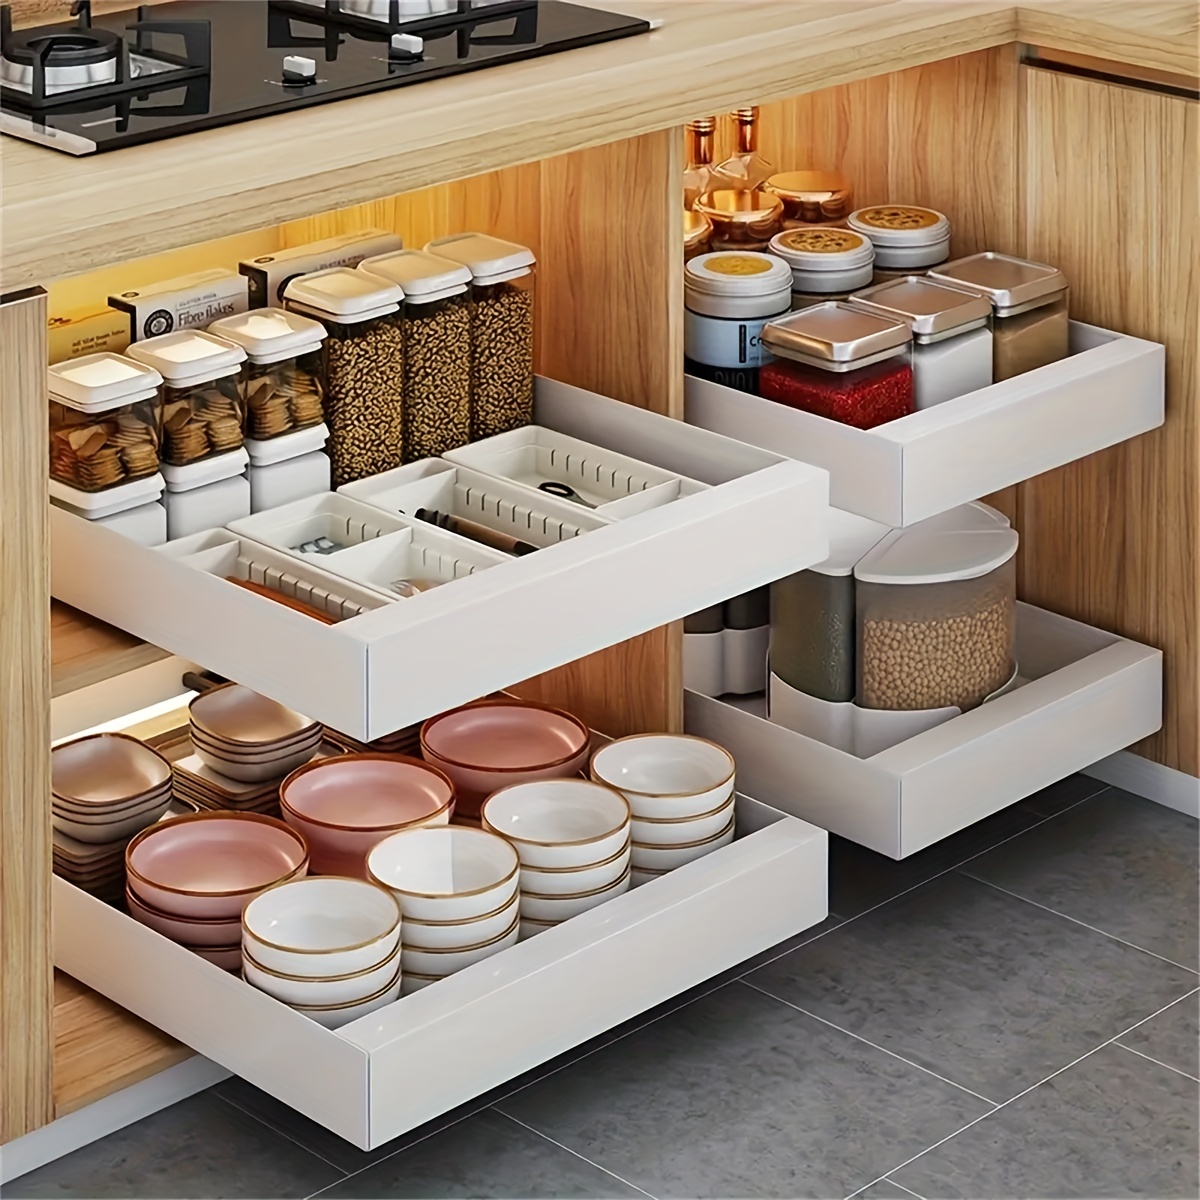 Kitchen Dish Storage Rack Cabinet Built-in Homemade Drawer-style Pull  Basket For Bowls And Plates Drainage Shelf